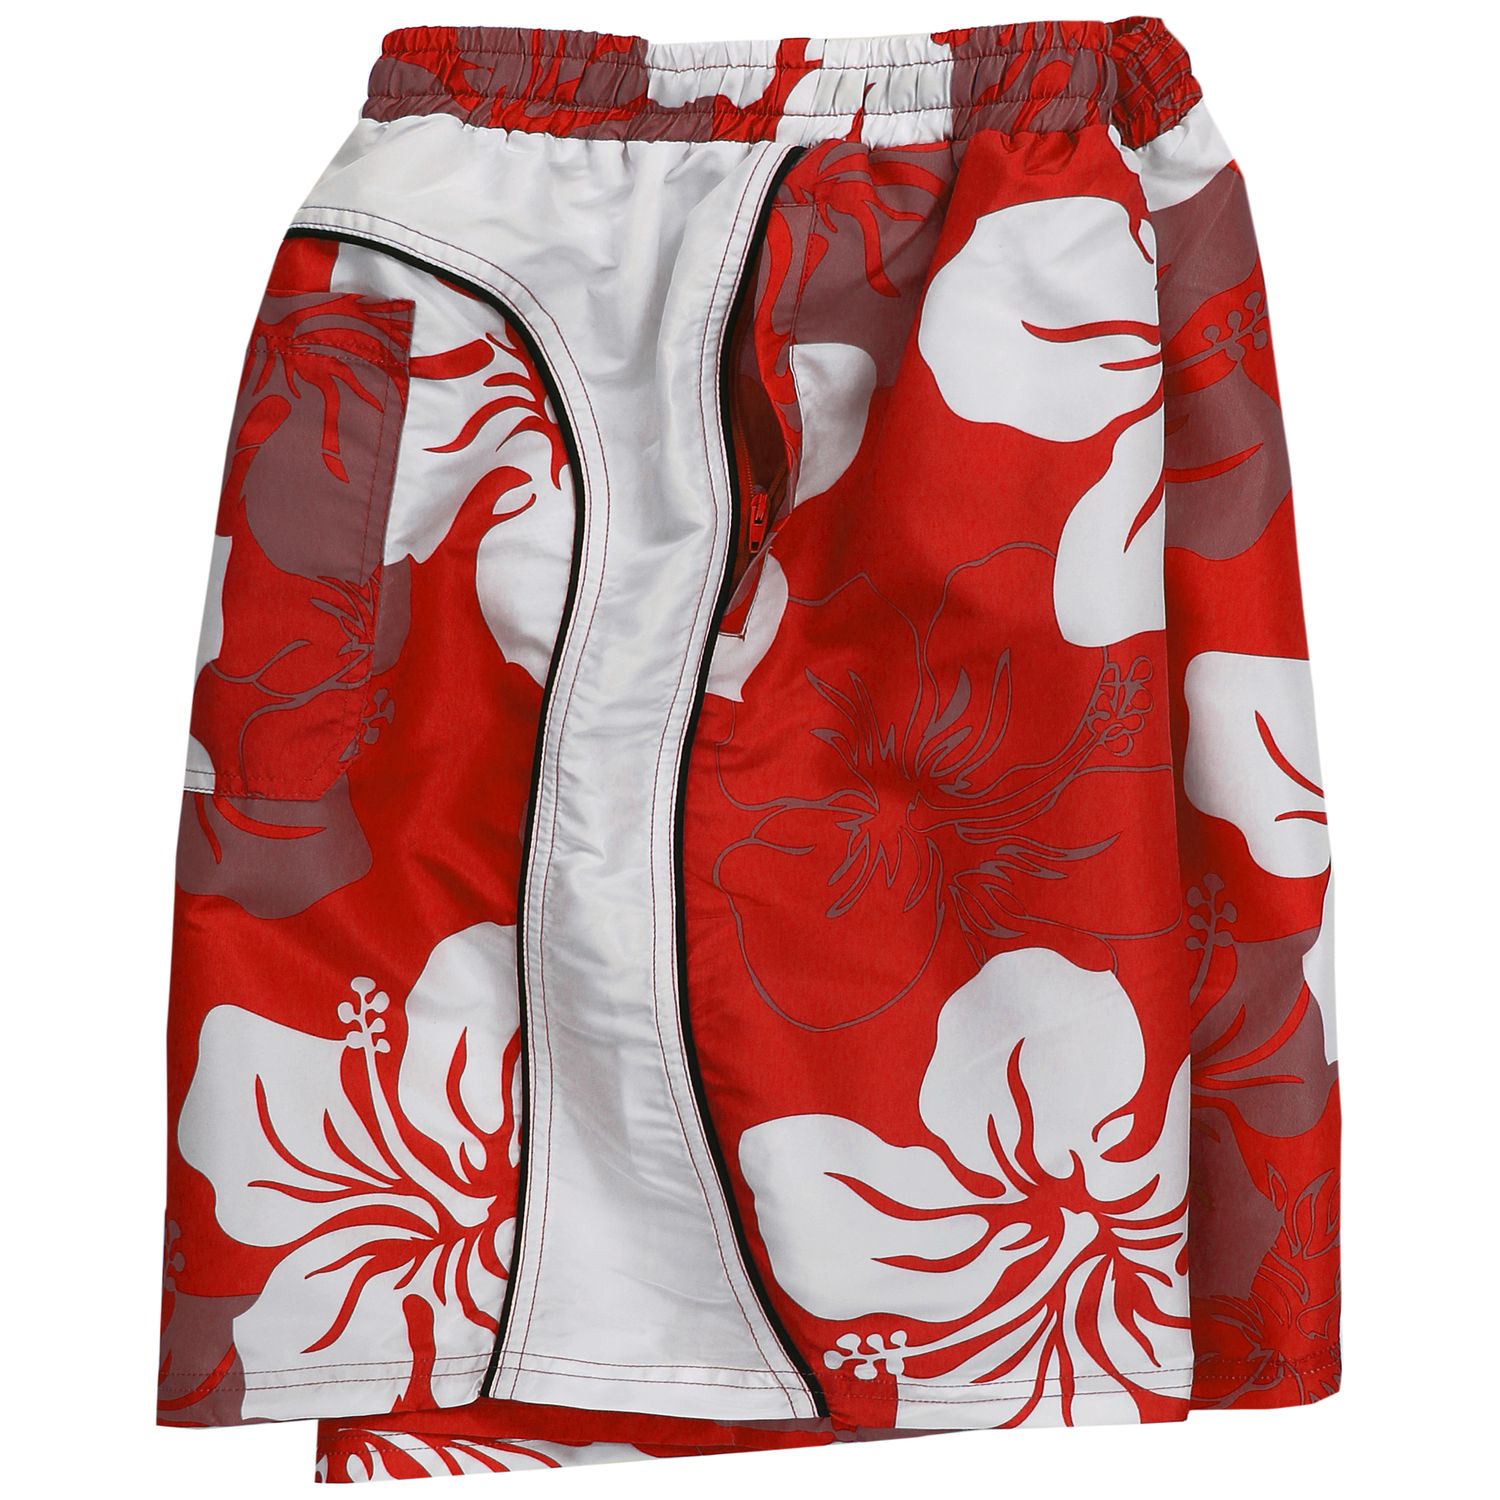 Bathing shorts by Abraxas for men red-white patterned in oversizes up to 10XL